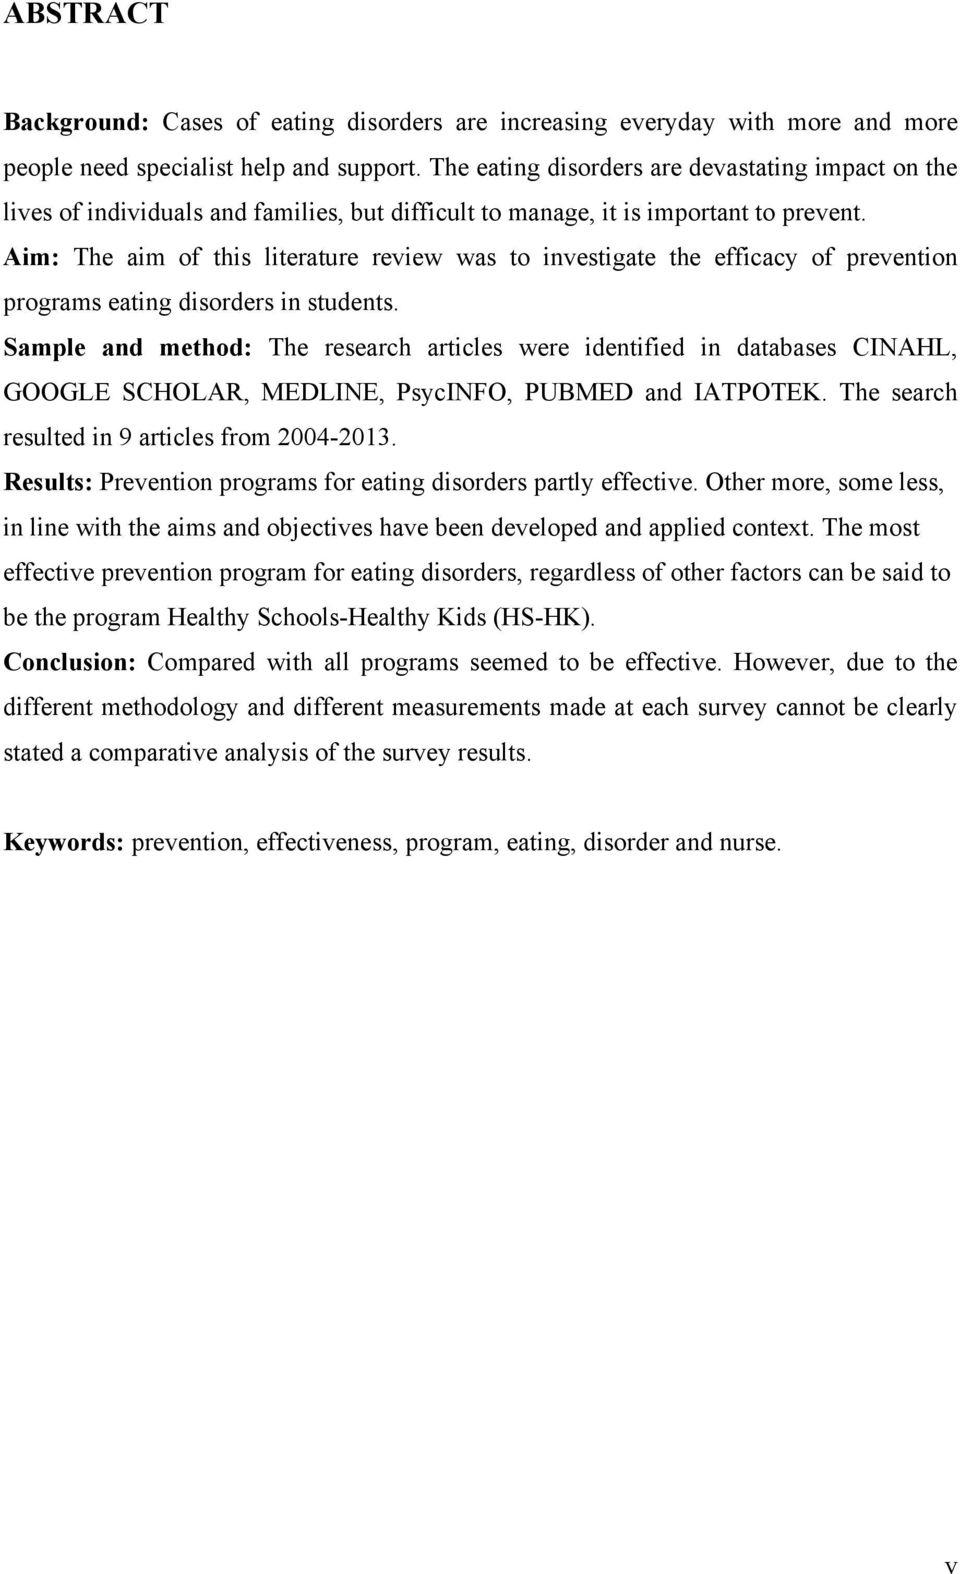 Aim: The aim of this literature review was to investigate the efficacy of prevention programs eating disorders in students.